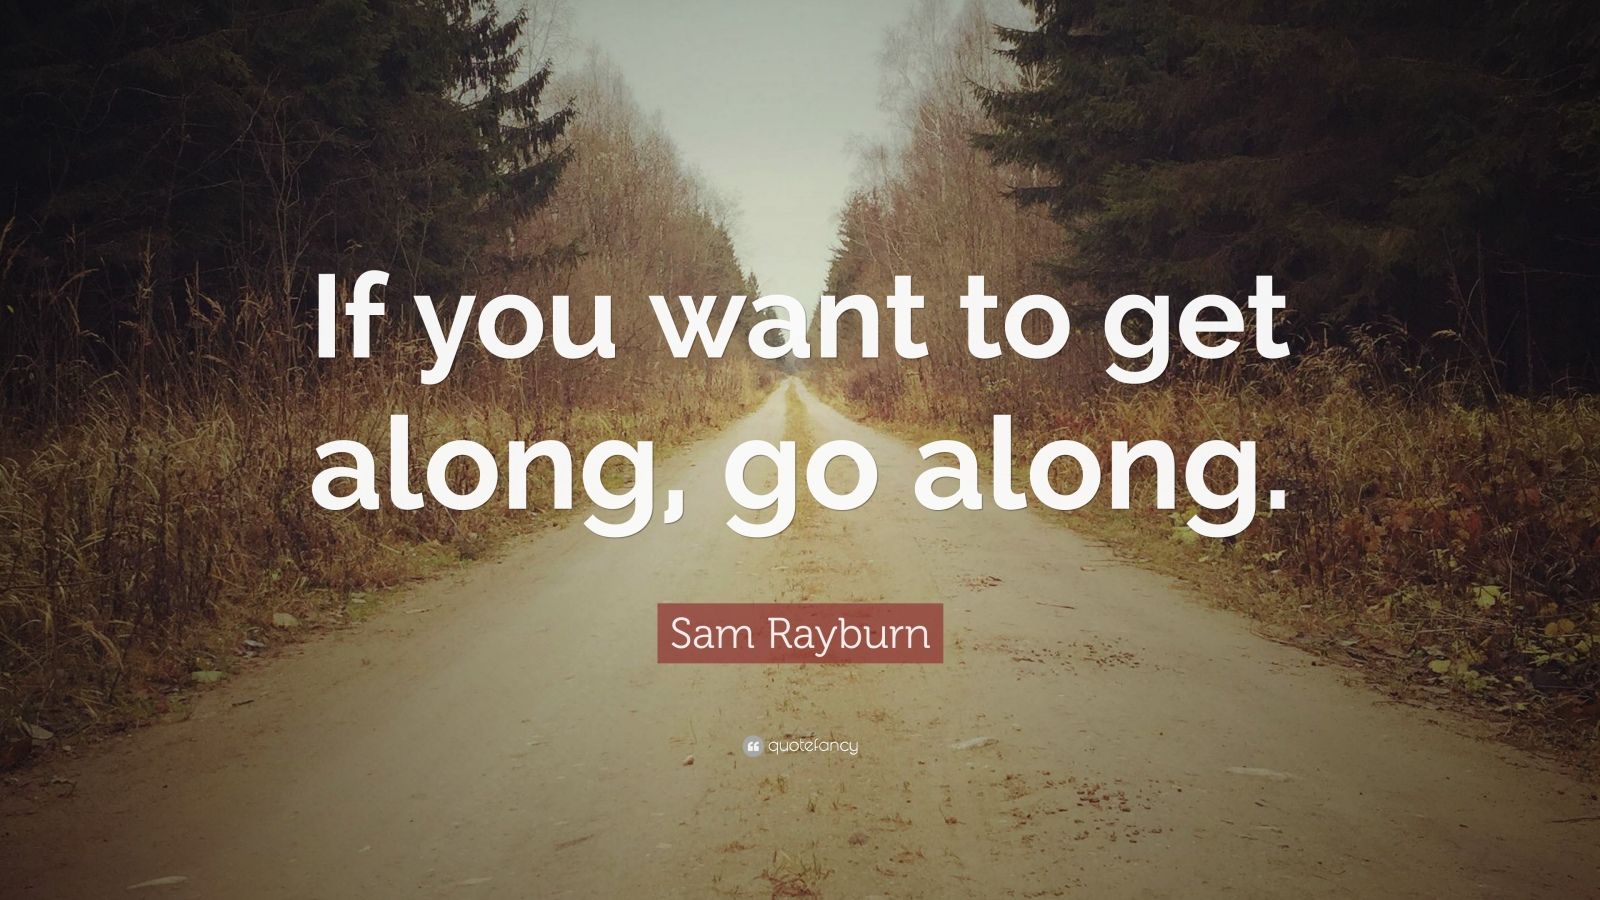 Sam Rayburn Quote: "If you want to get along, go along." (9 wallpapers) - Quotefancy